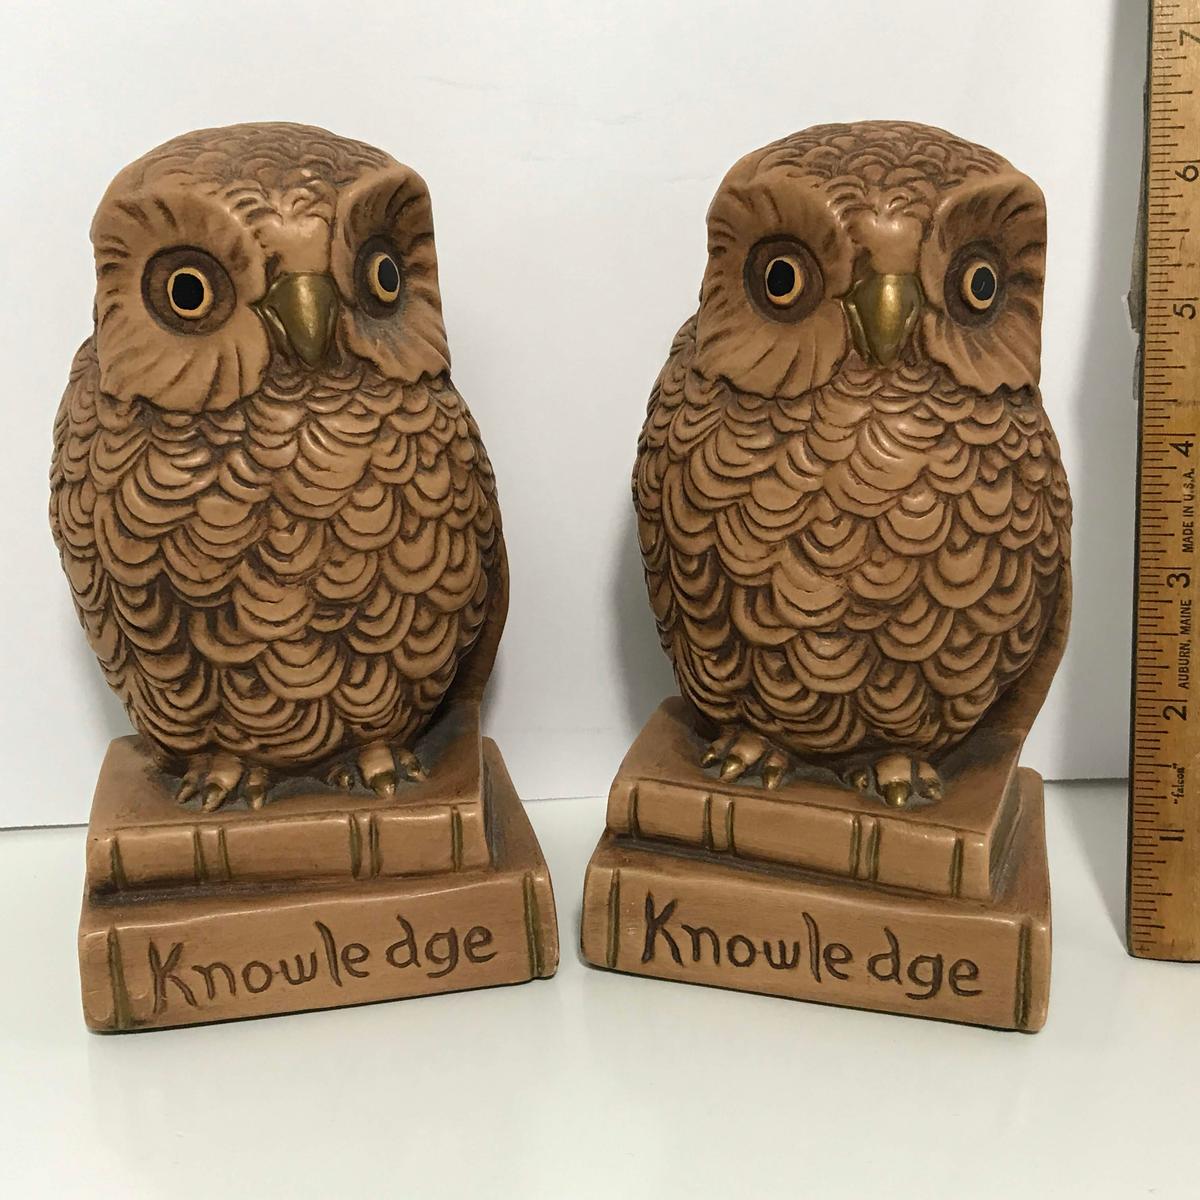 Pair of Vintage “Knowledge” Ceramic Owl Bookends